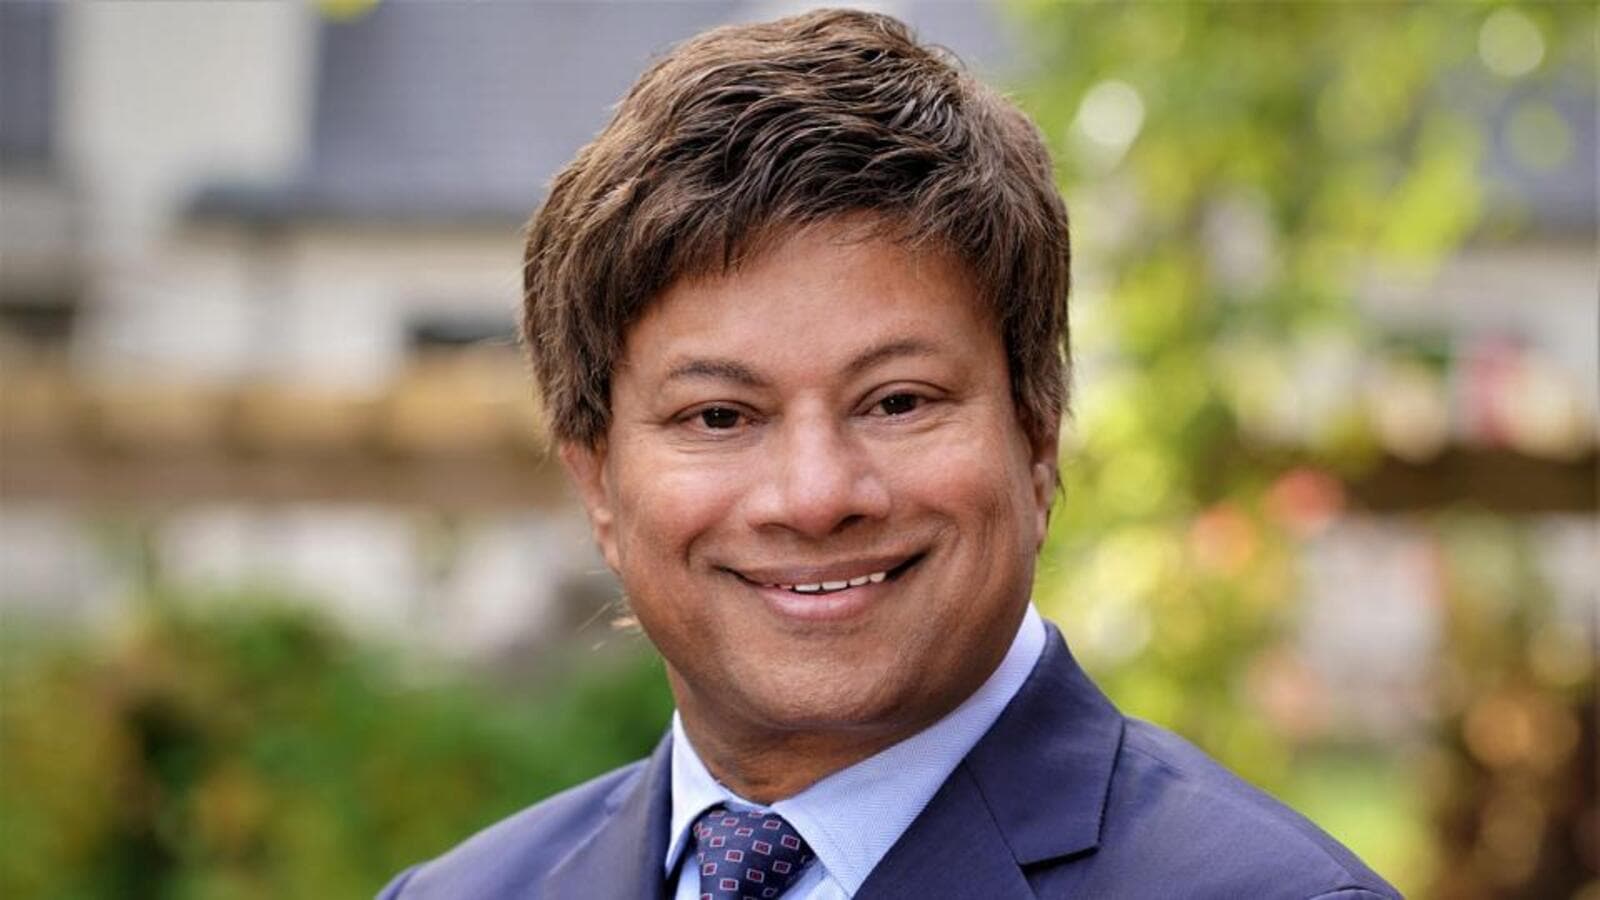 us-midterms-from-belgaum-to-capitol-hill-shri-thanedar-set-to-become-fifth-indian-american-congressman